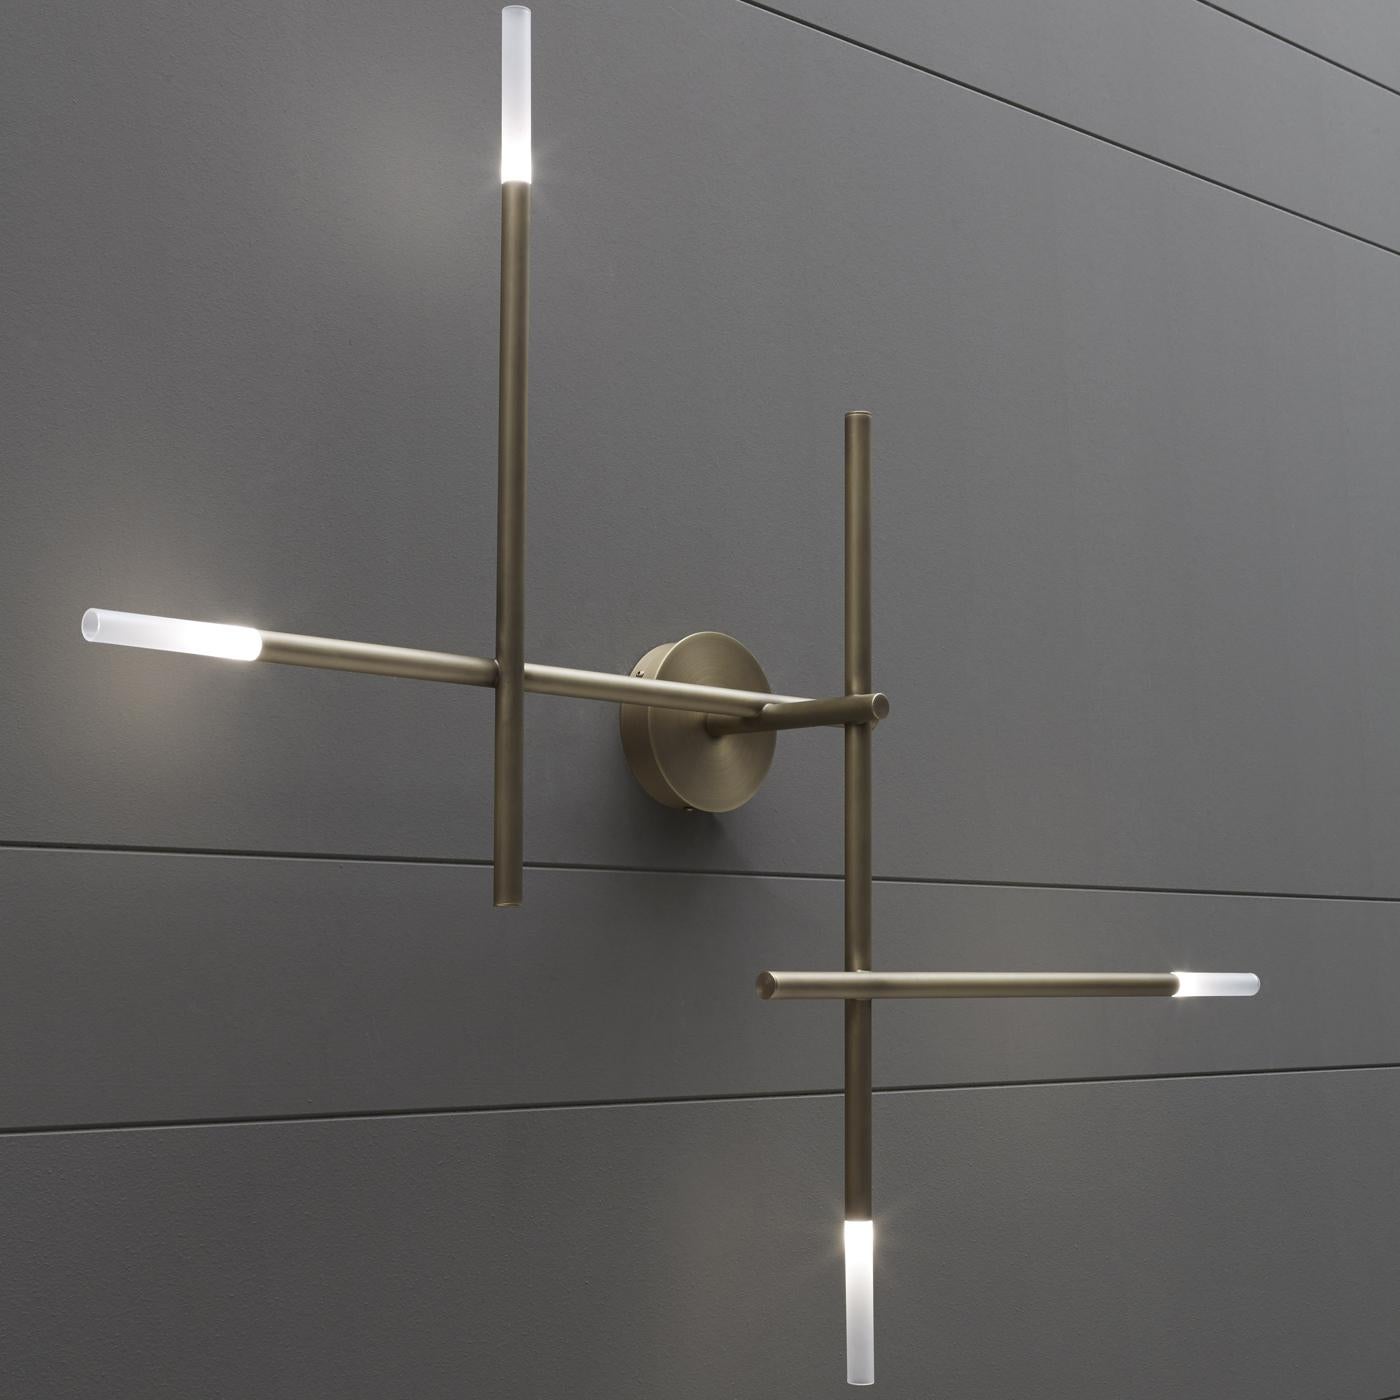 This elegant wall lamp projects direct light from glazed glass diffusers mounted at the top of metal rods assembled to form a system of parallel and perpendicular lines. The finish of the metal can be in striped dark bronze, etched bronze, polished